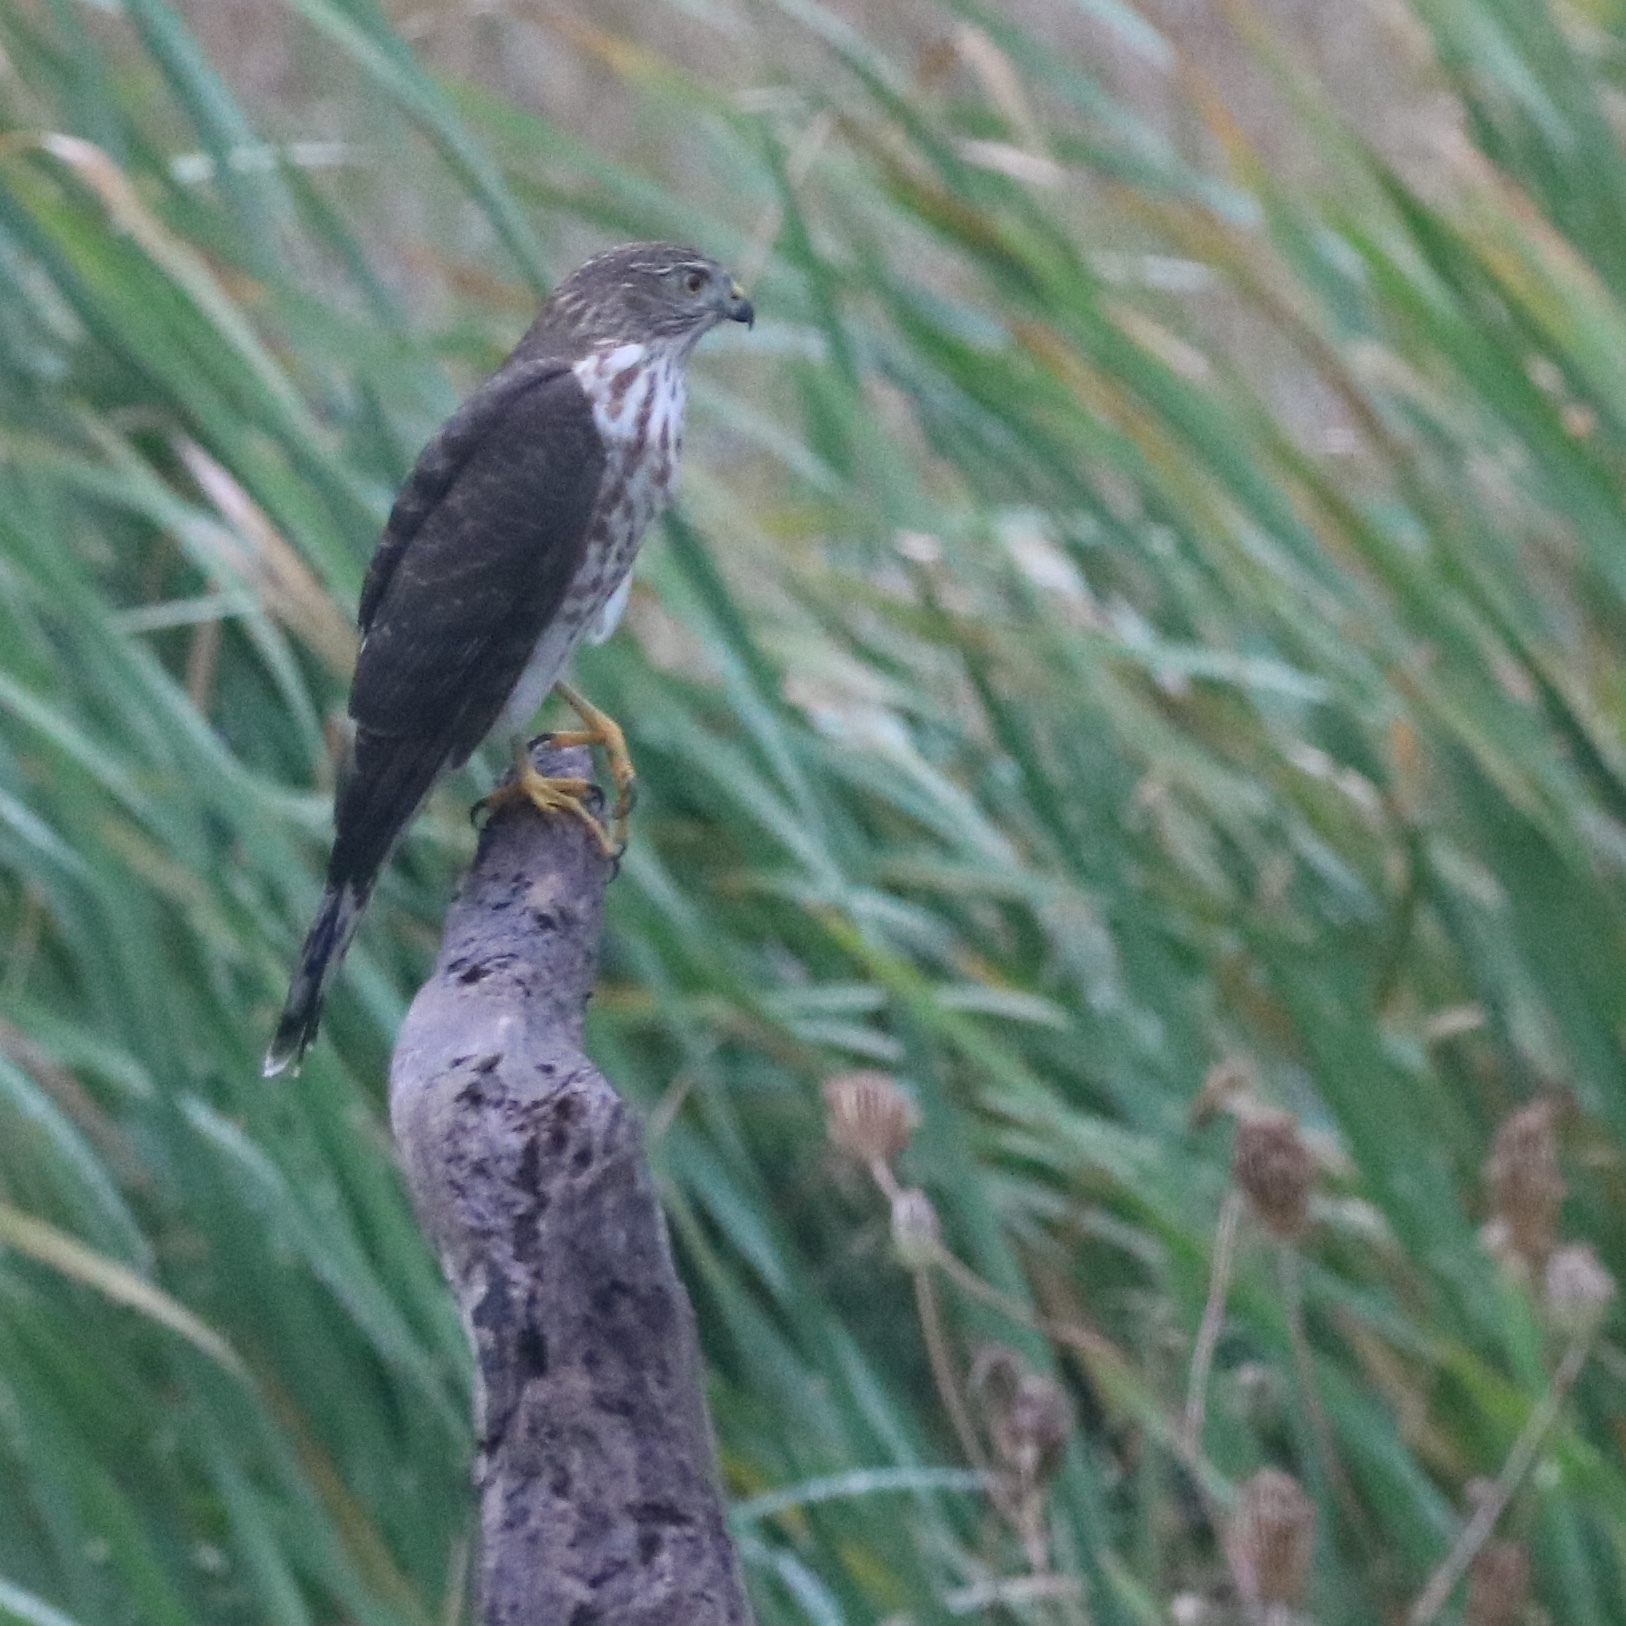 a merlin sitting on a tree branch with tall grass in the background